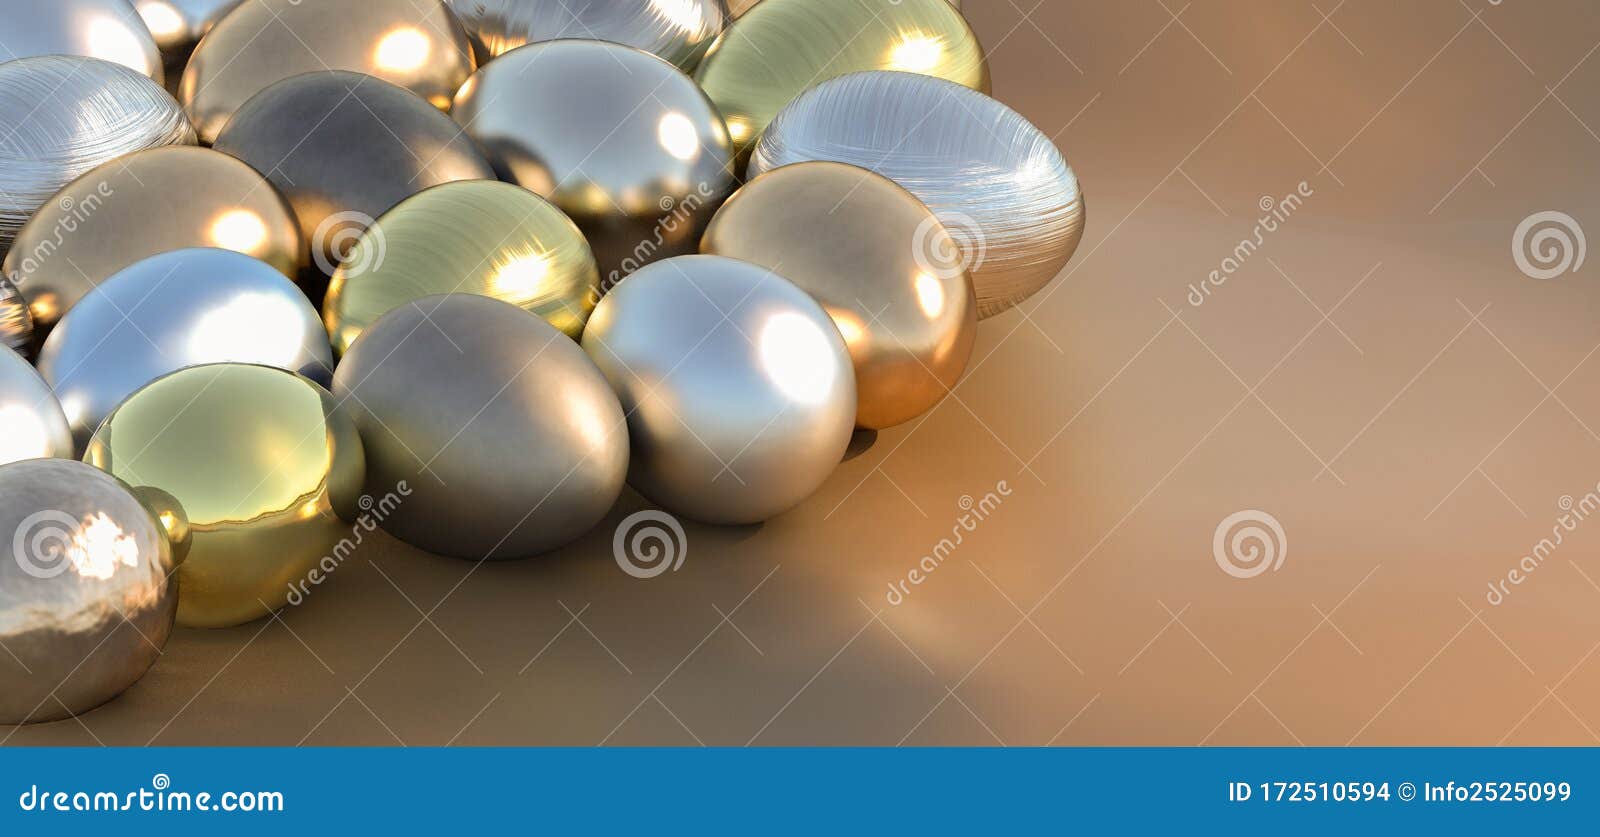 metallic golden and silver easter eggs